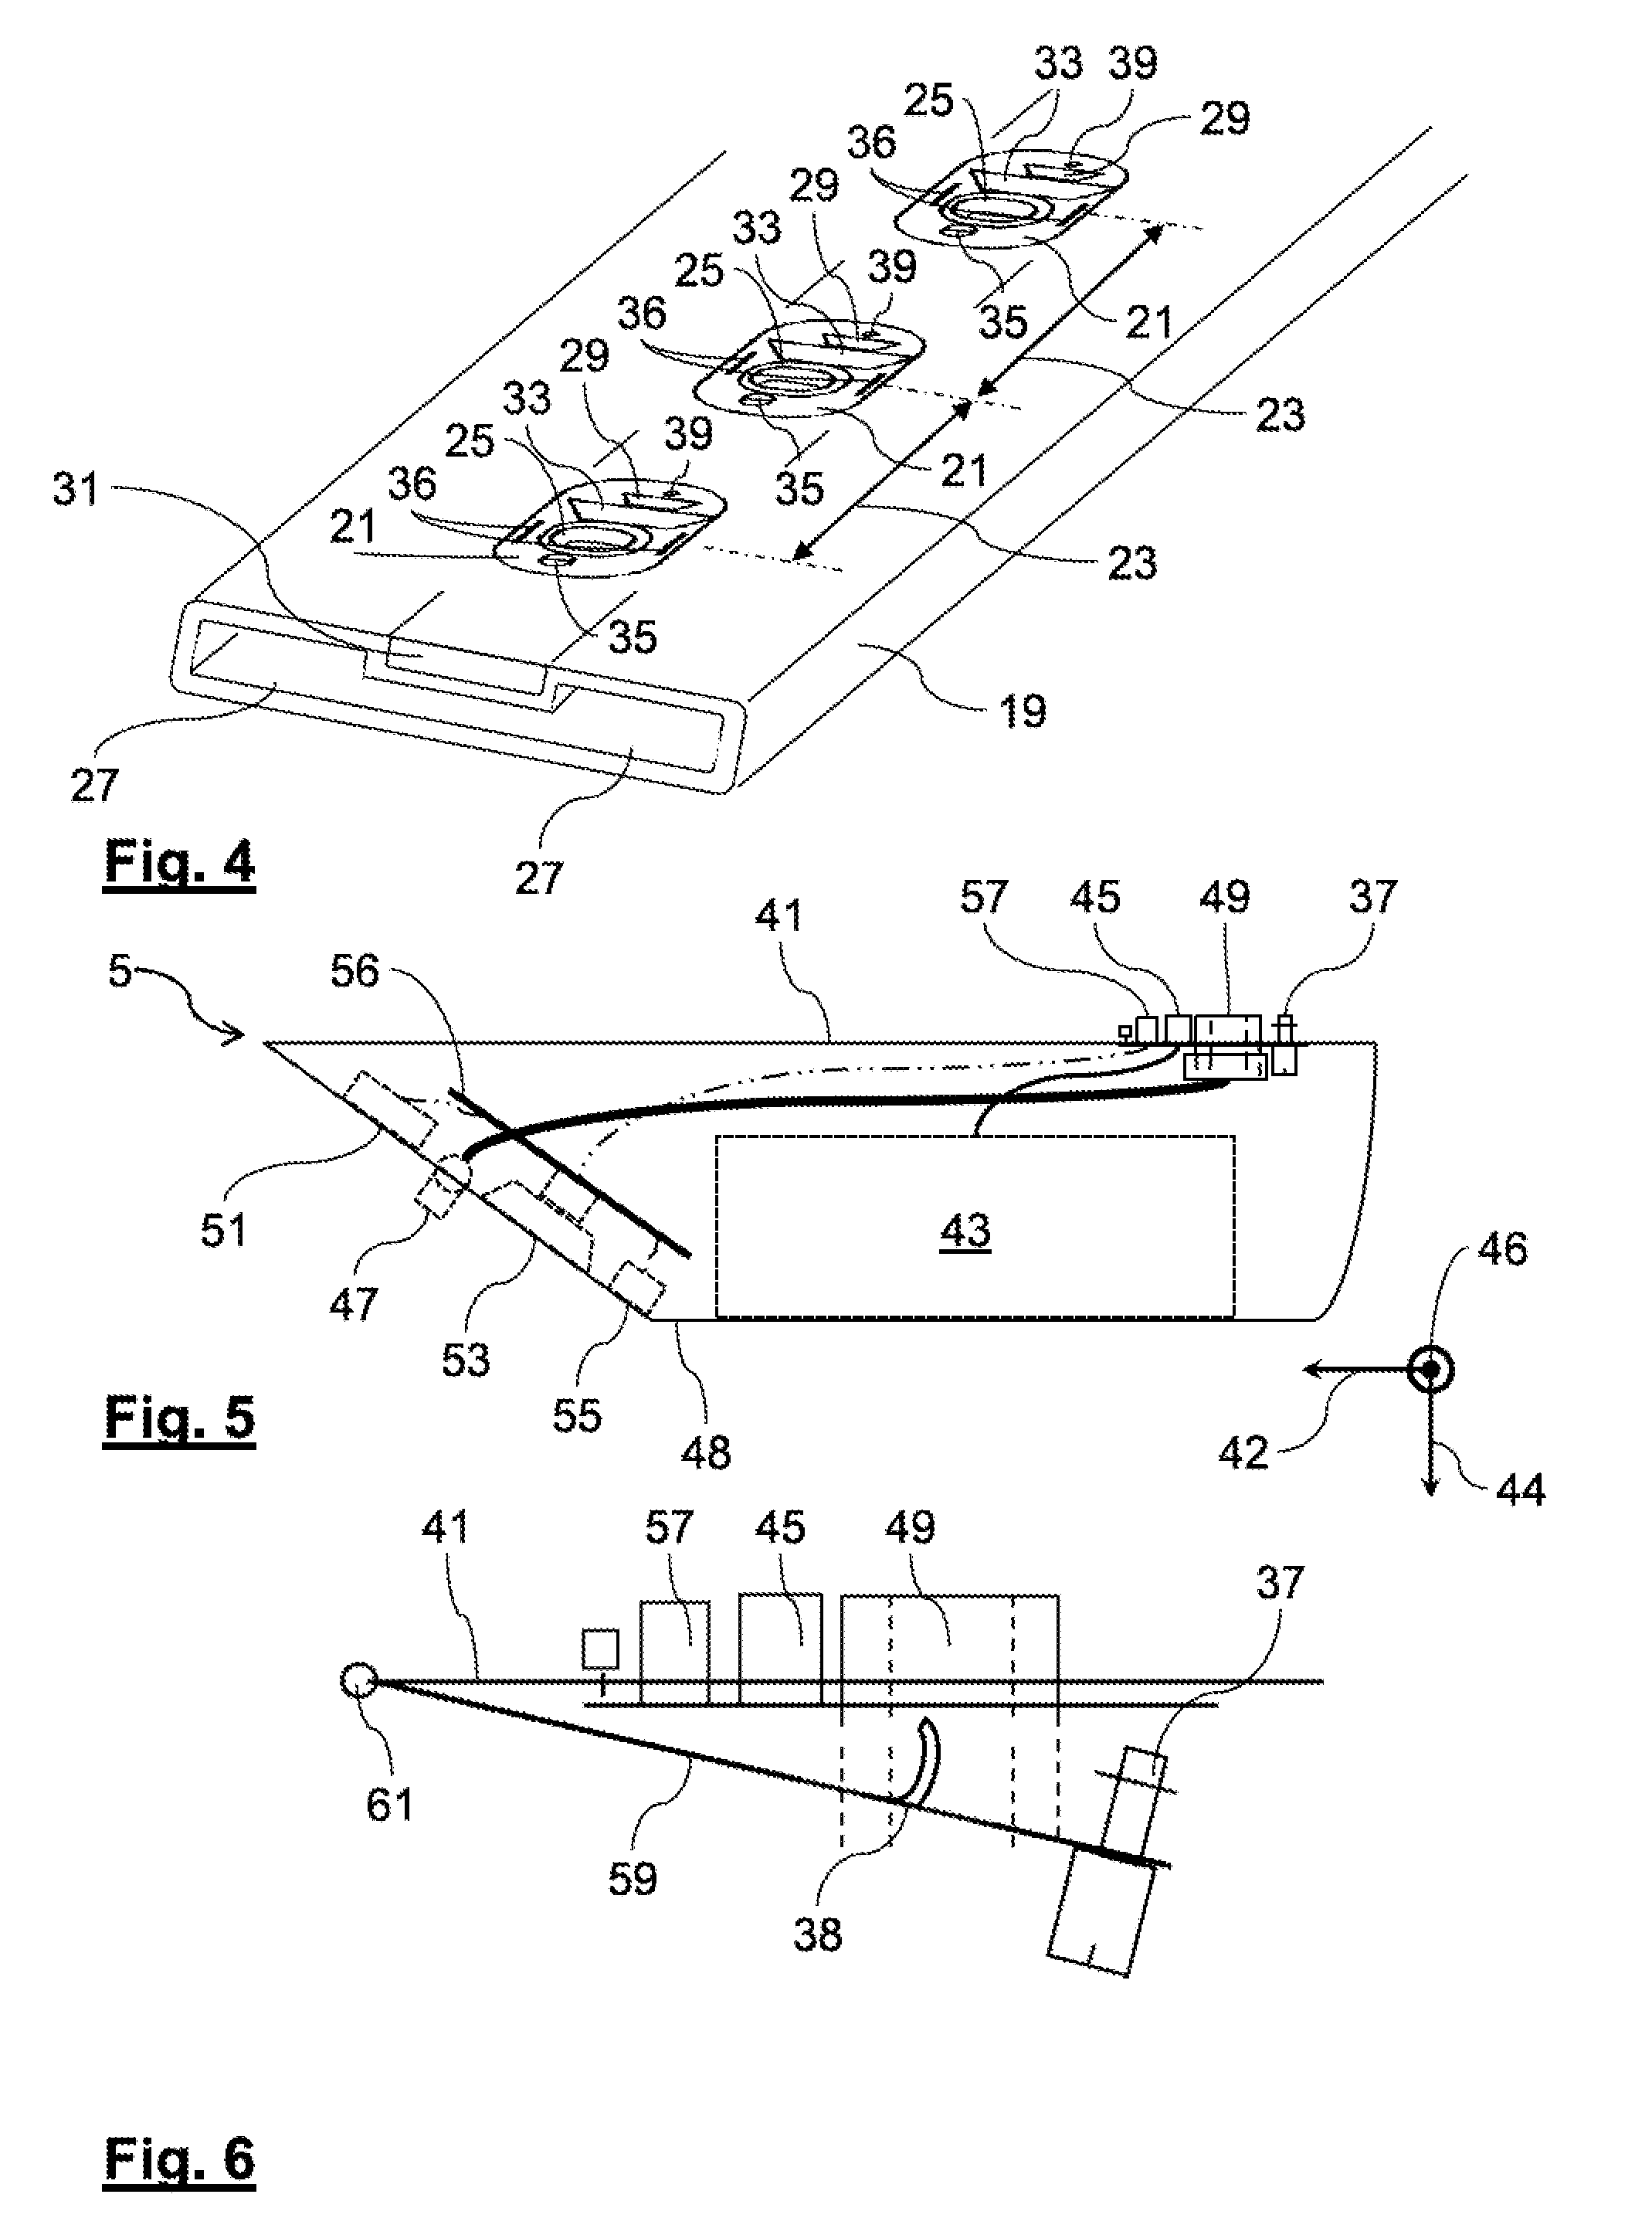 Panel for mounting a passenger supply unit and a passenger supply unit